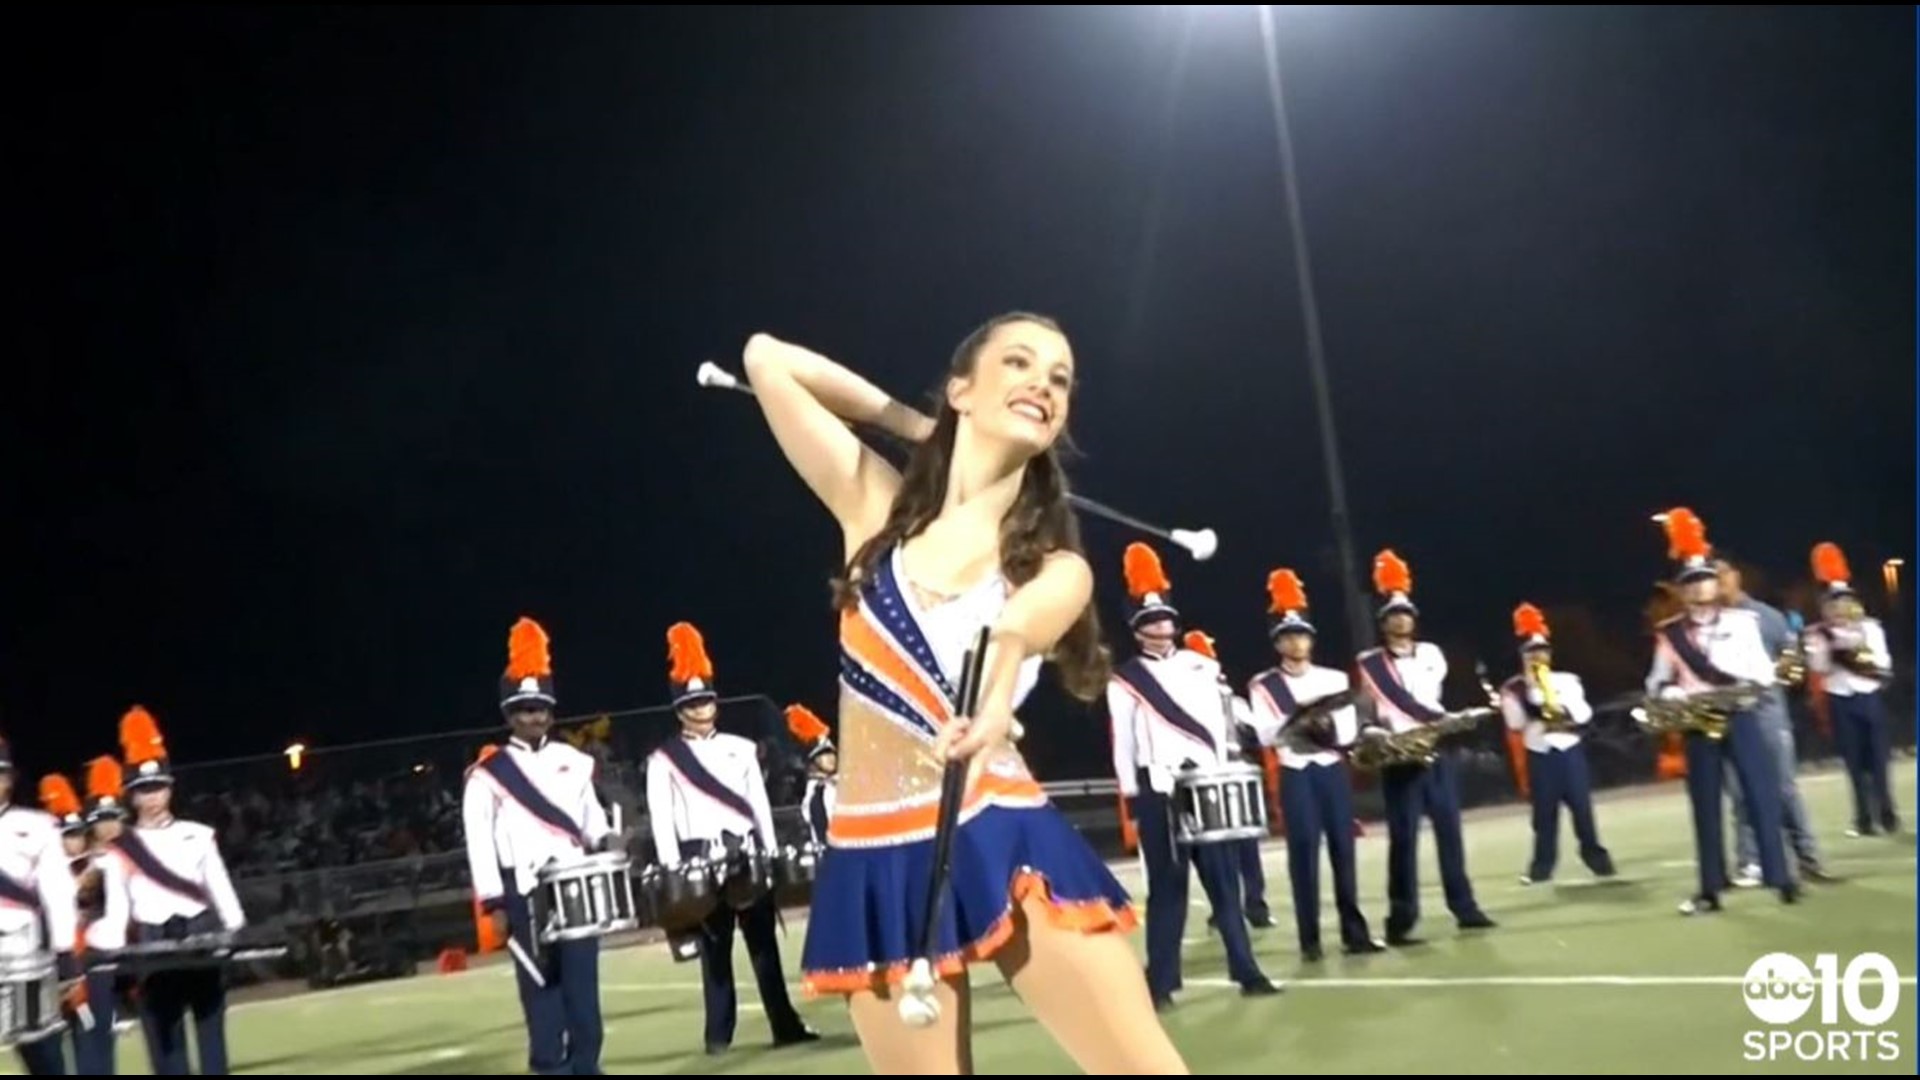 Cosumnes Oaks High School junior Madeline Stiehl explains how she first started baton twirling and what her competition goals are in this week's Sports Standout.